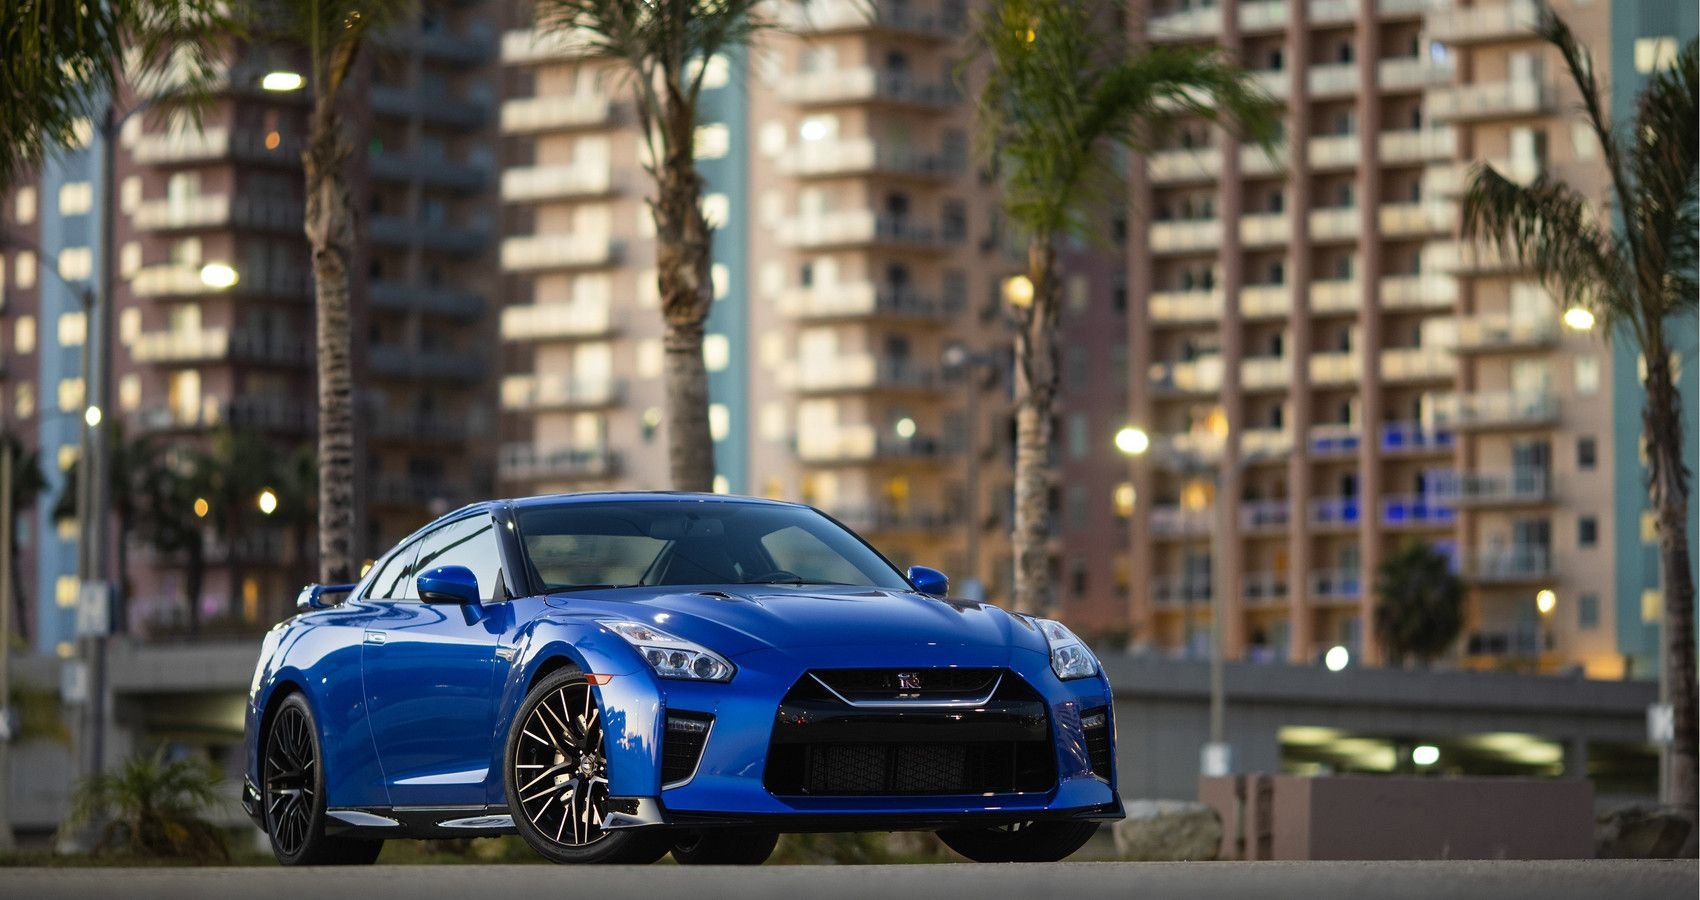 5 Most Overpriced New Sports Cars (5 That Are Expensive But Worth Every Penny)